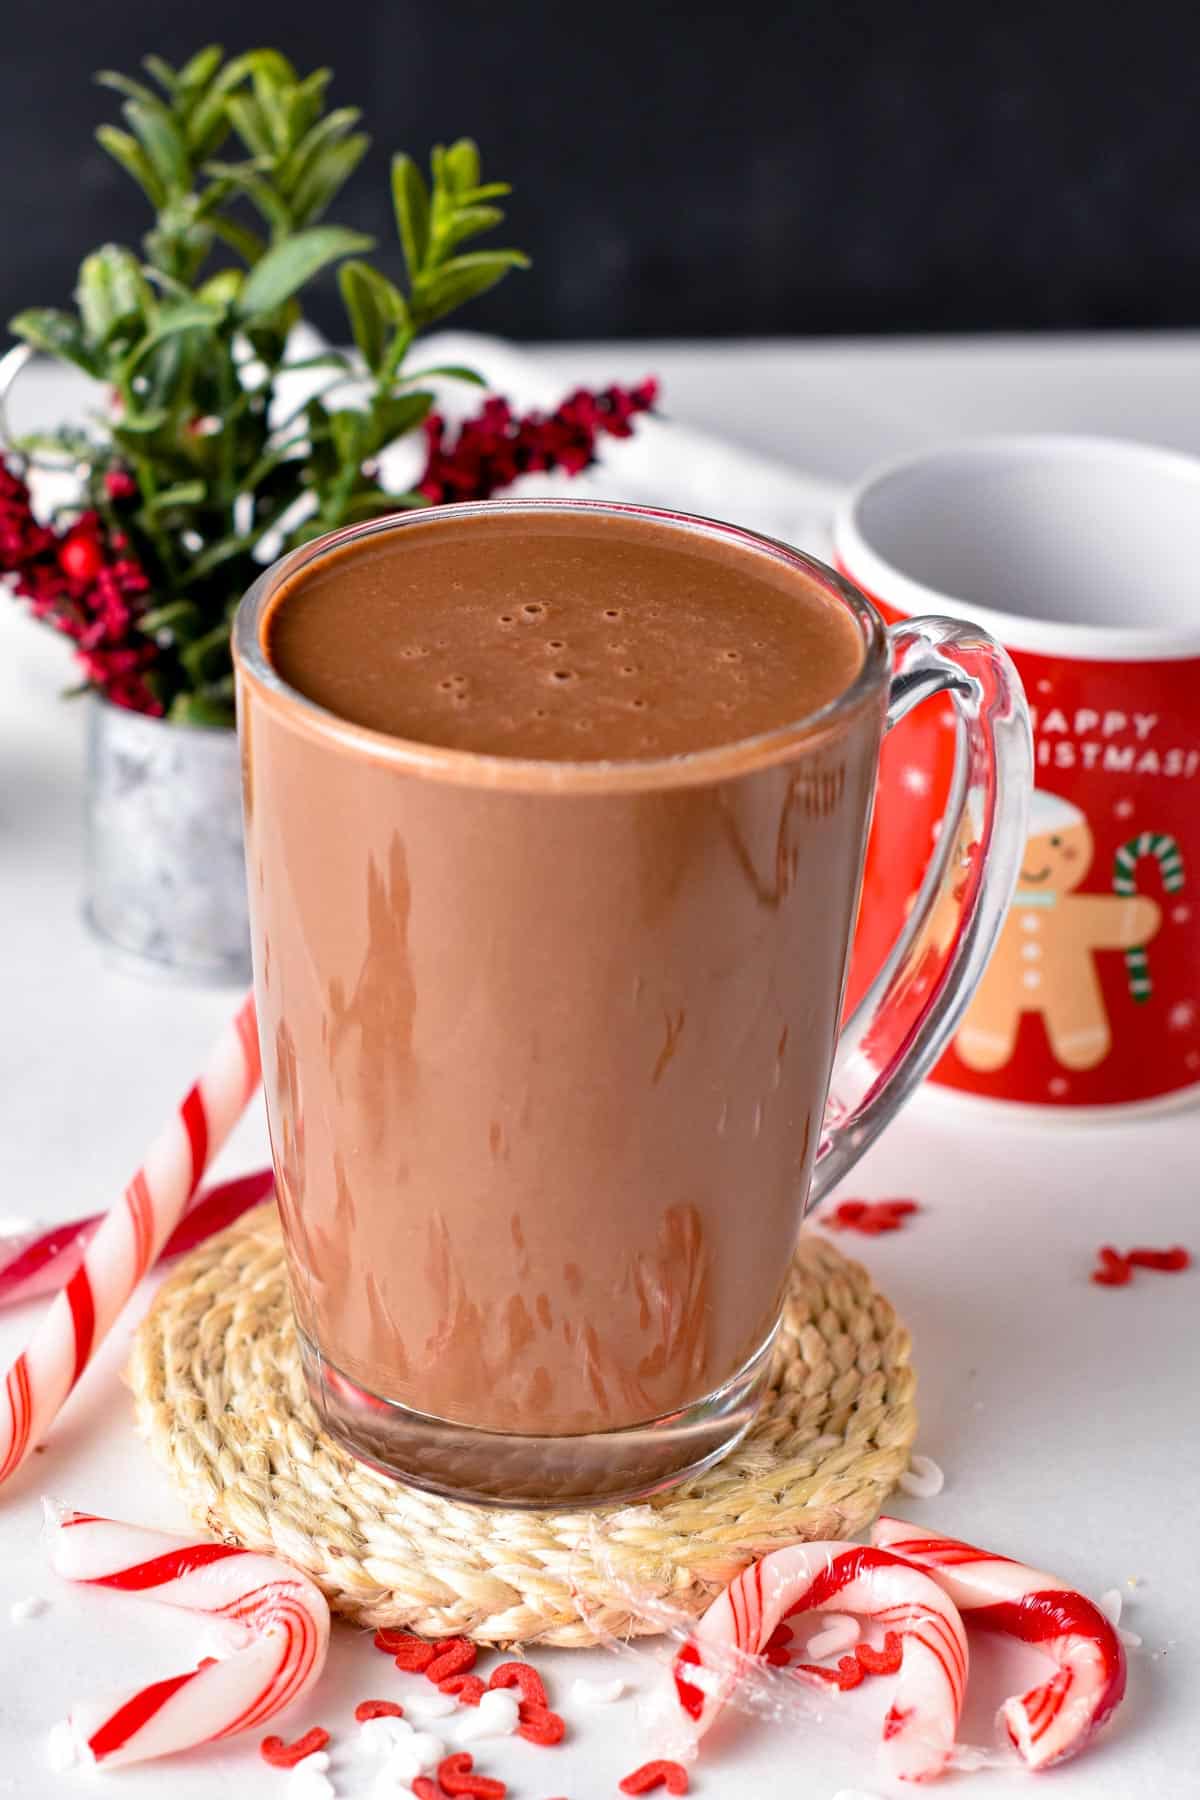 Peppermint Hot Chocolate in a mug with a branch in a vase on the background.